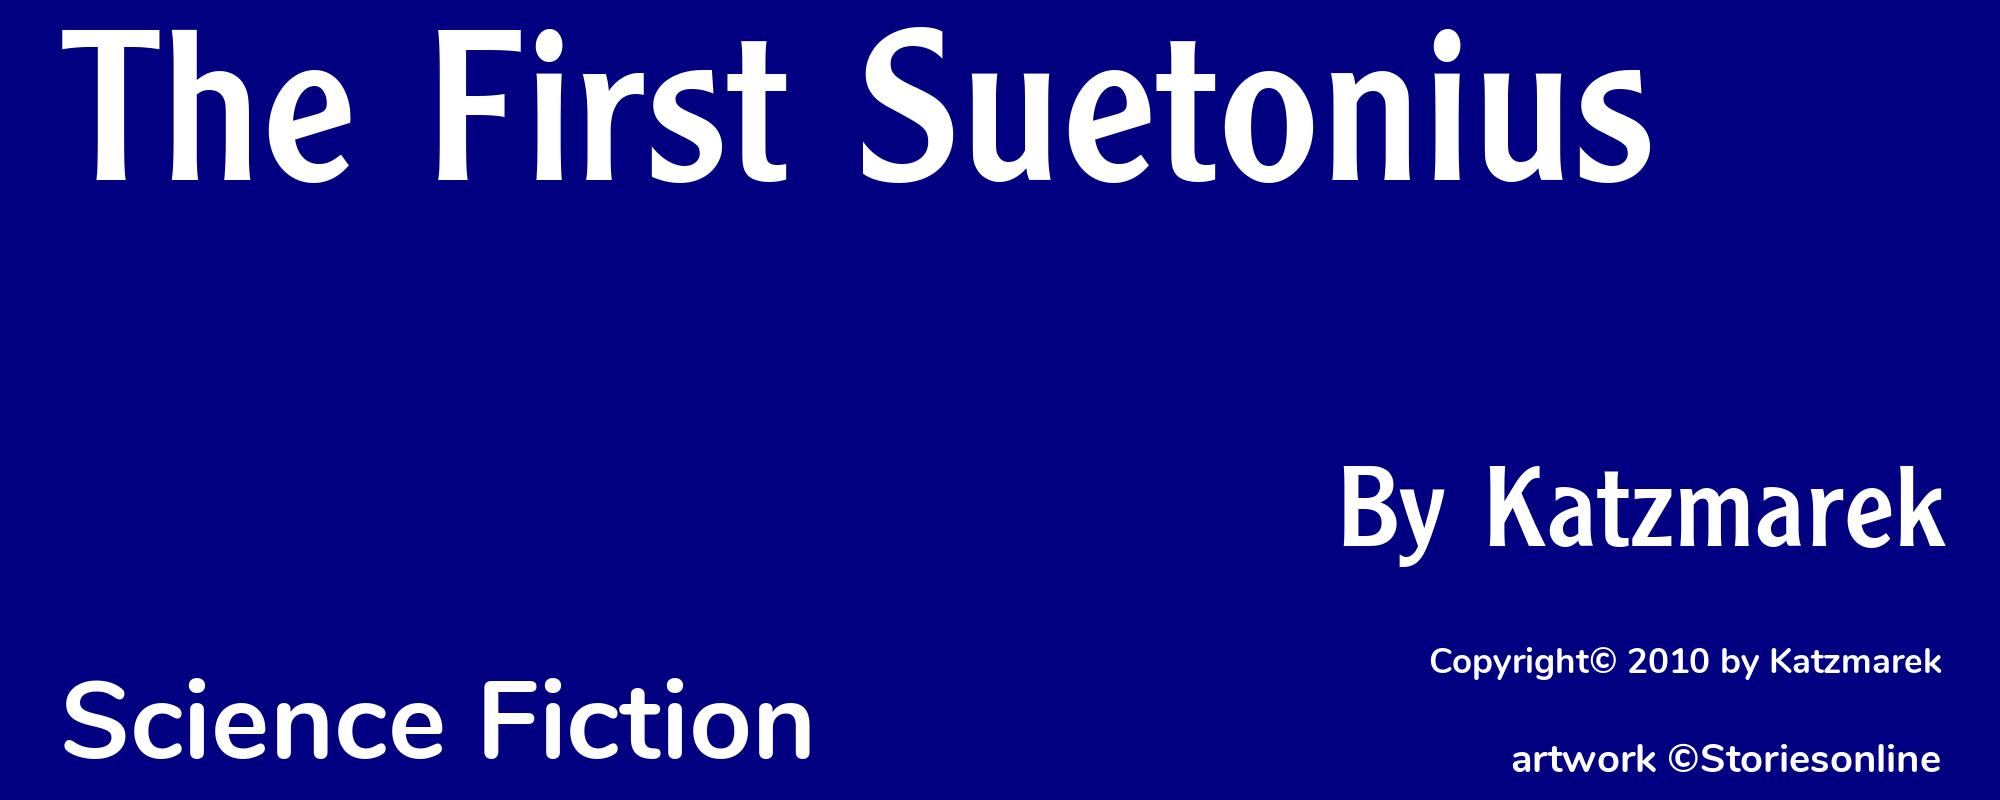 The First Suetonius - Cover